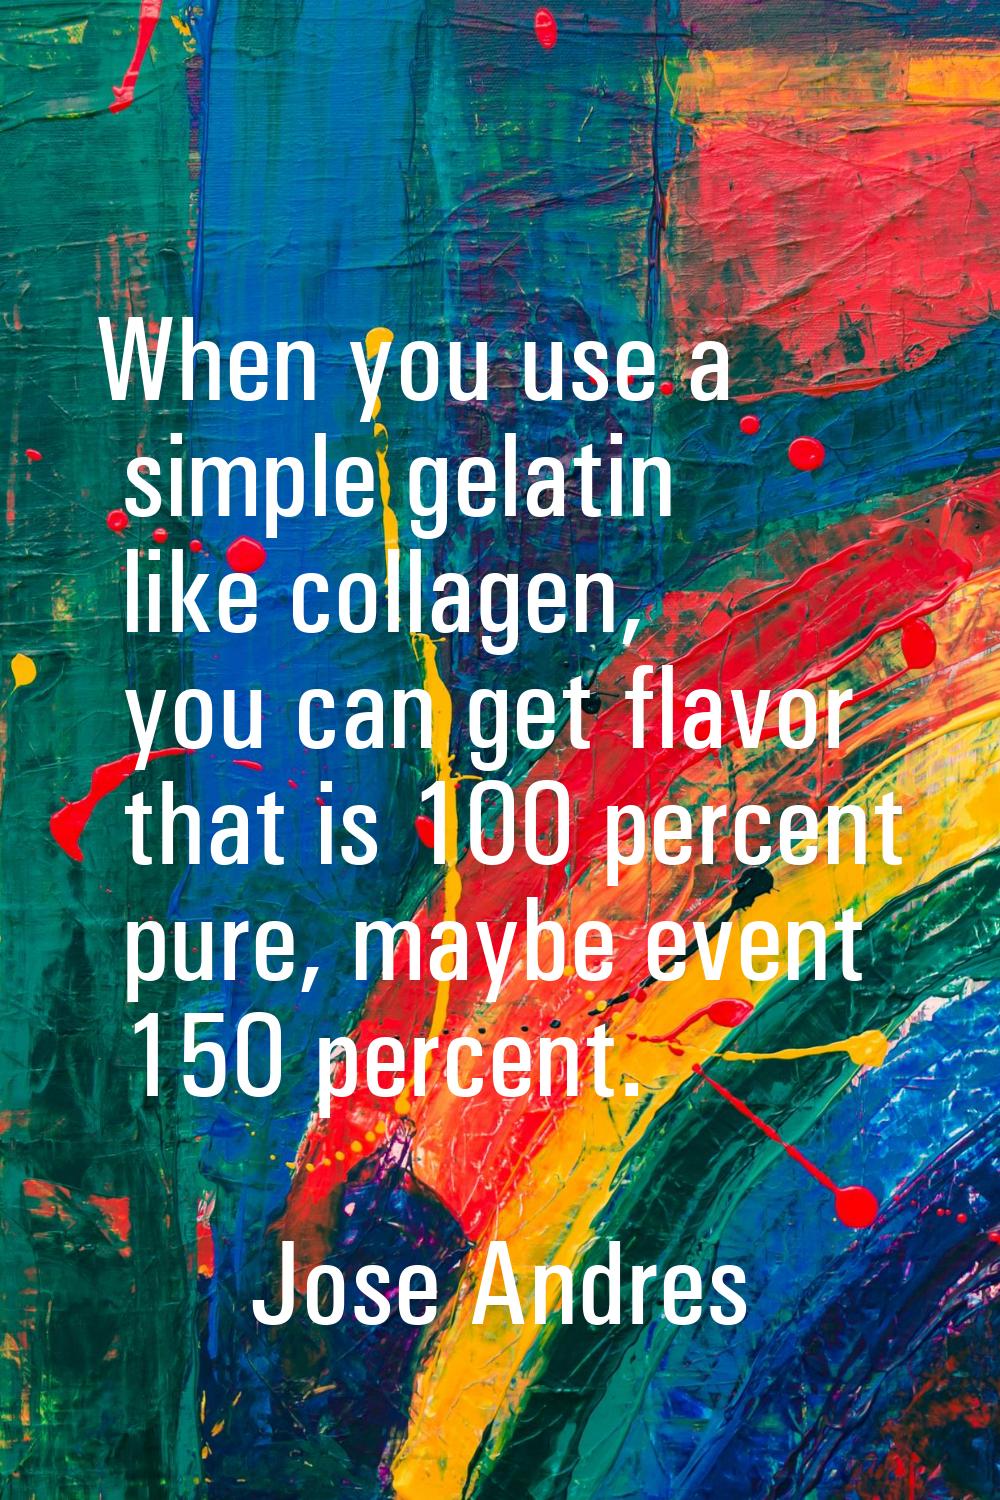 When you use a simple gelatin like collagen, you can get flavor that is 100 percent pure, maybe eve